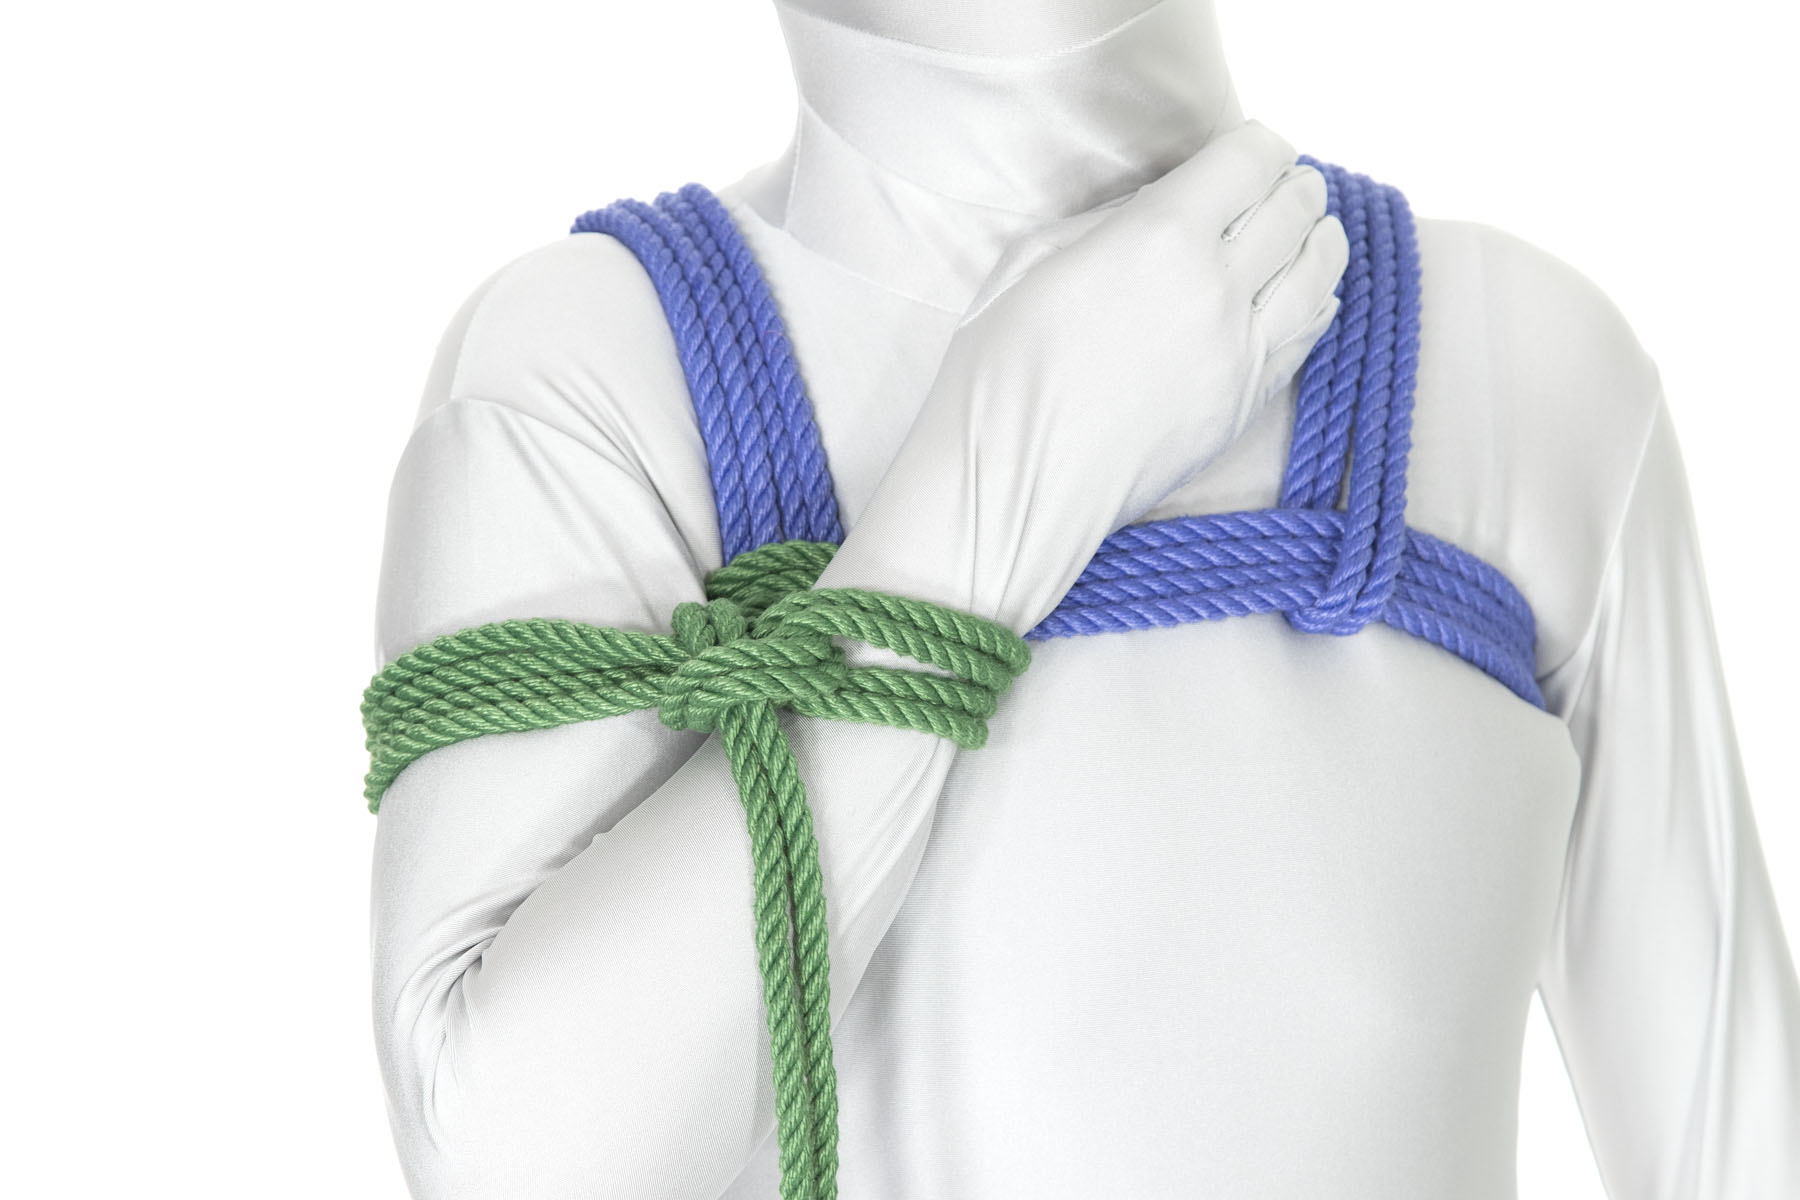 A person in a white bodysuit wearing a blue chest harness. Their right arm is bent tightly at the elbow and is held in front of the body, with the hand over the breastbone. A green column tie binds the upper and lower arm together and is tied off to the chest harness.